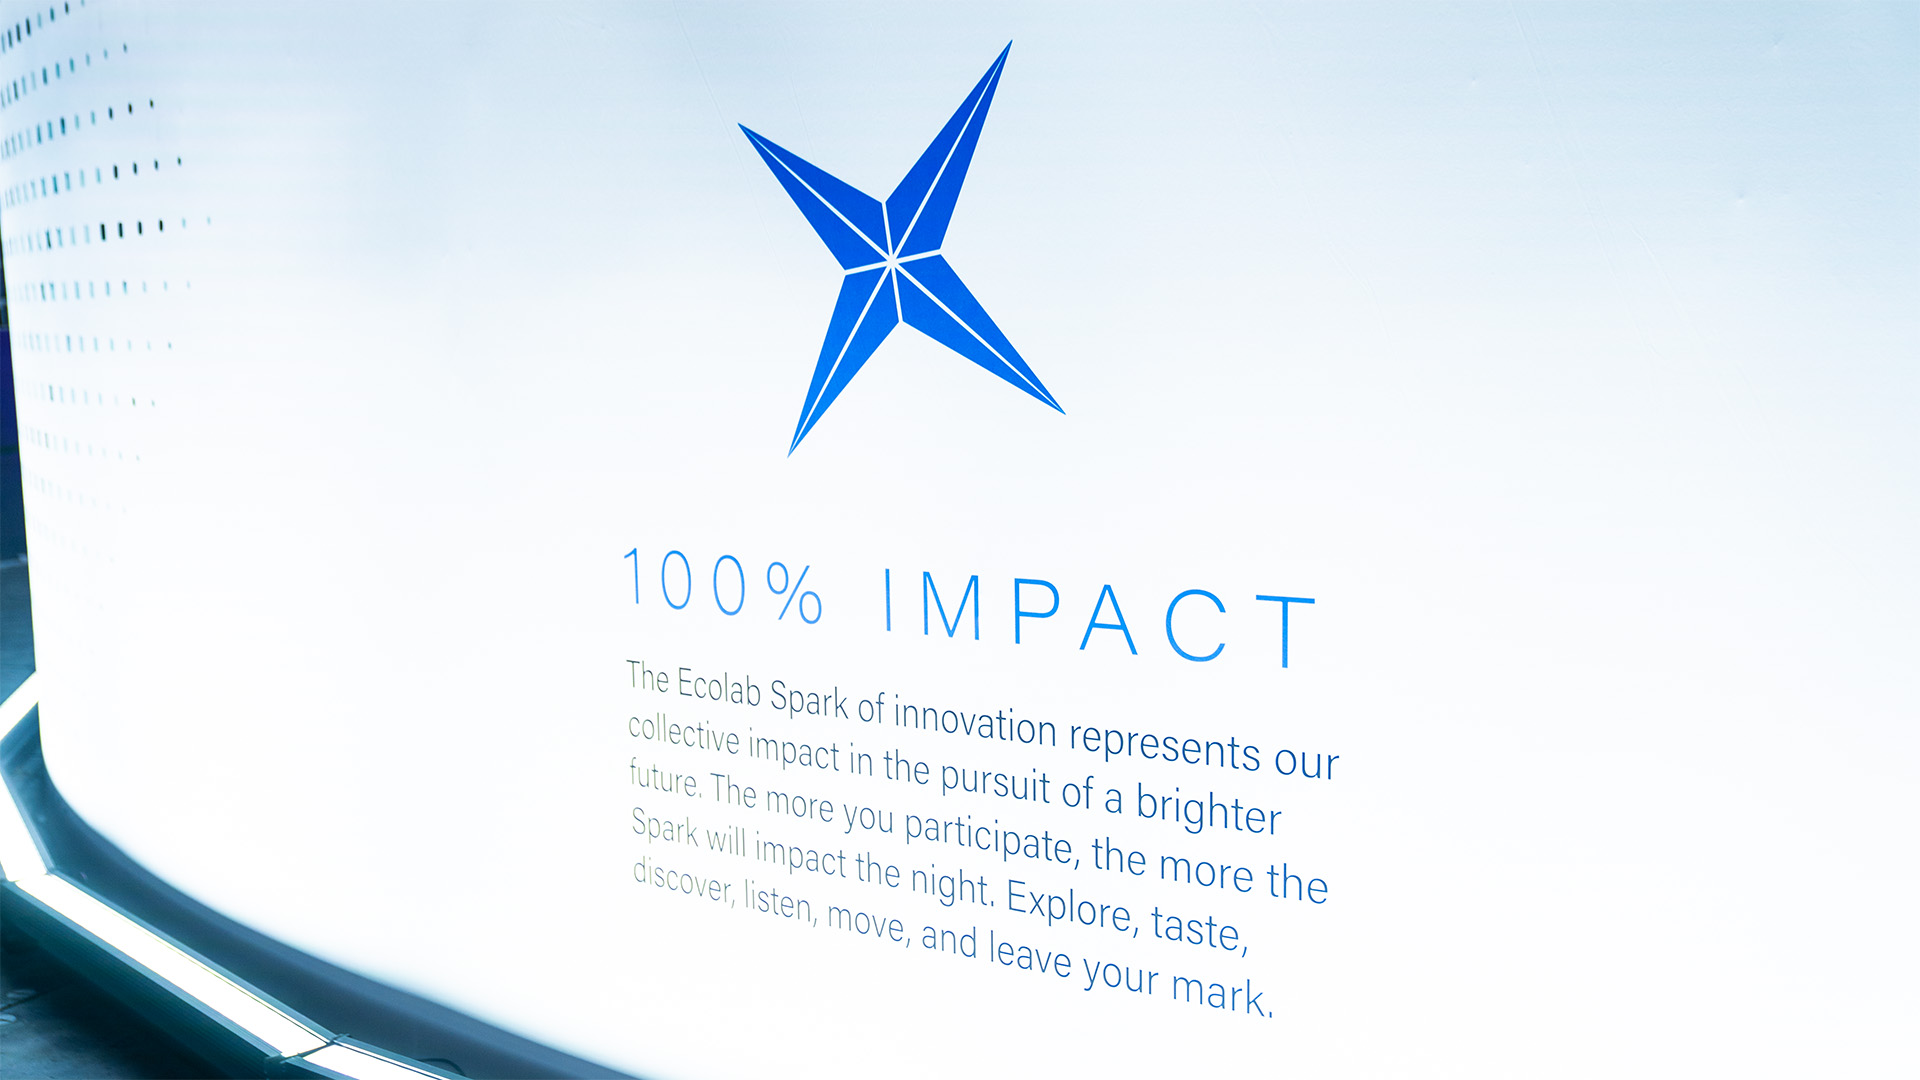 A white wall with the Ecolab logo in the center, a header text of "100% IMPACT" below, and other promotional text following after